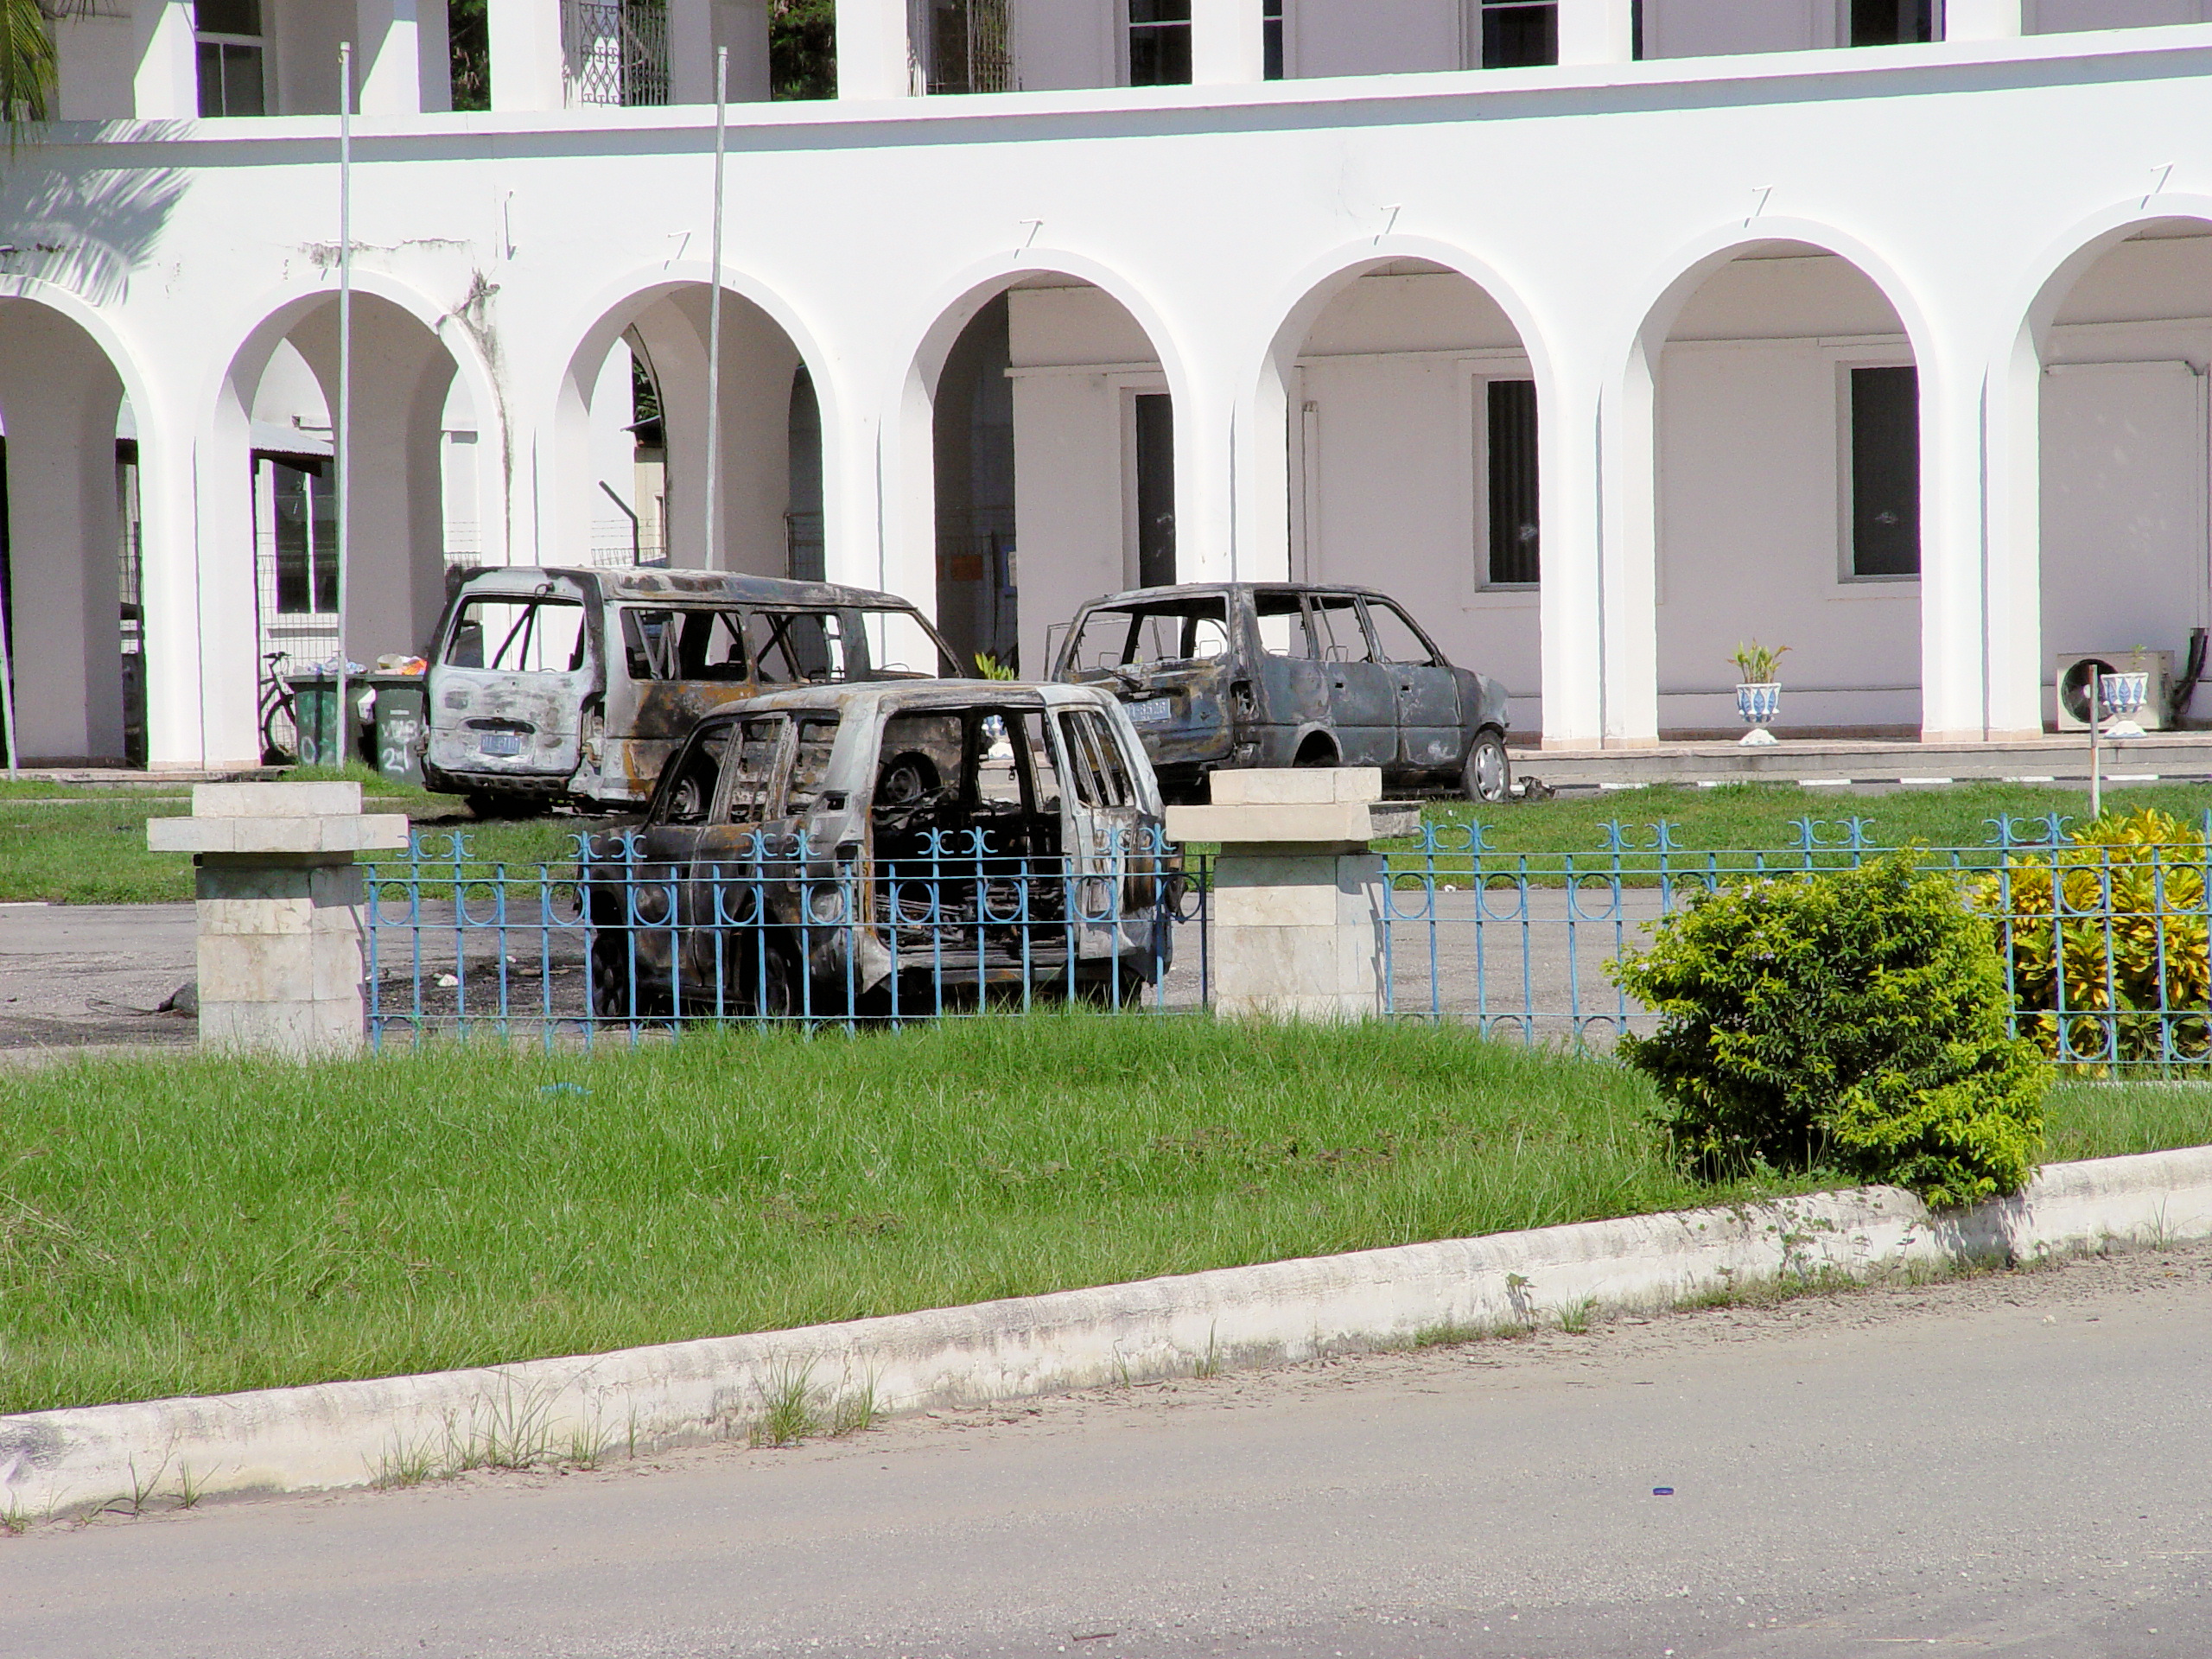 The Places of East Timor - Riot aftermath at Governor's Palace on April 28